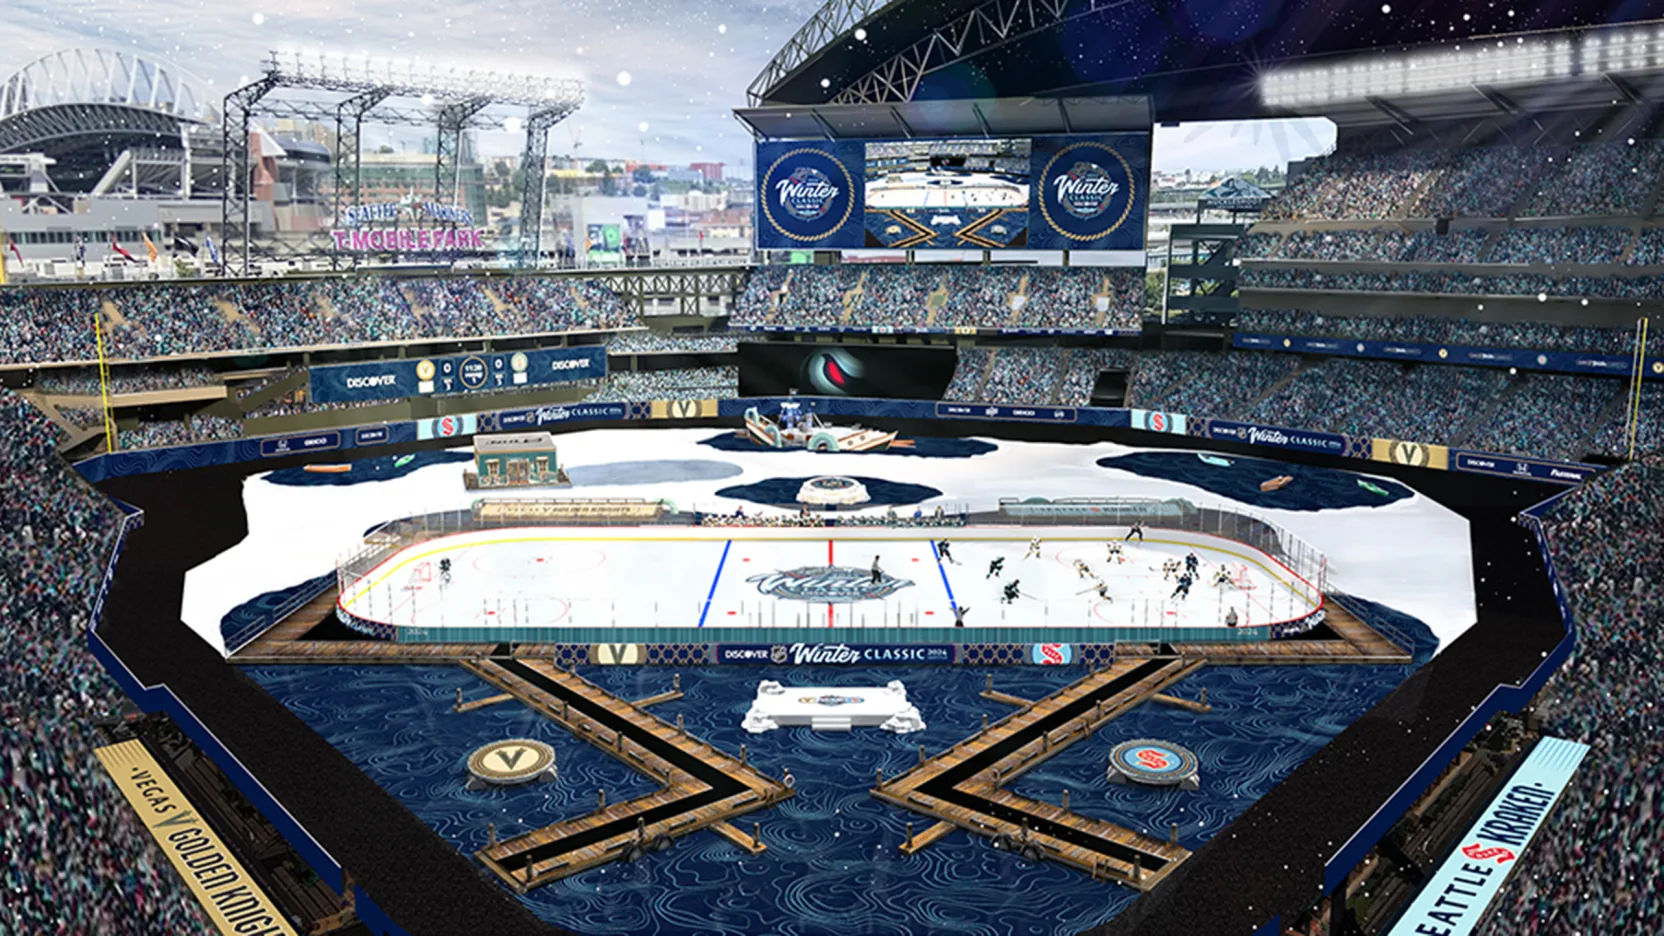 An illustrated preview of the NHL's takeover of T-Mobile Park, home of Major League Baseball’s Seattle Mariners